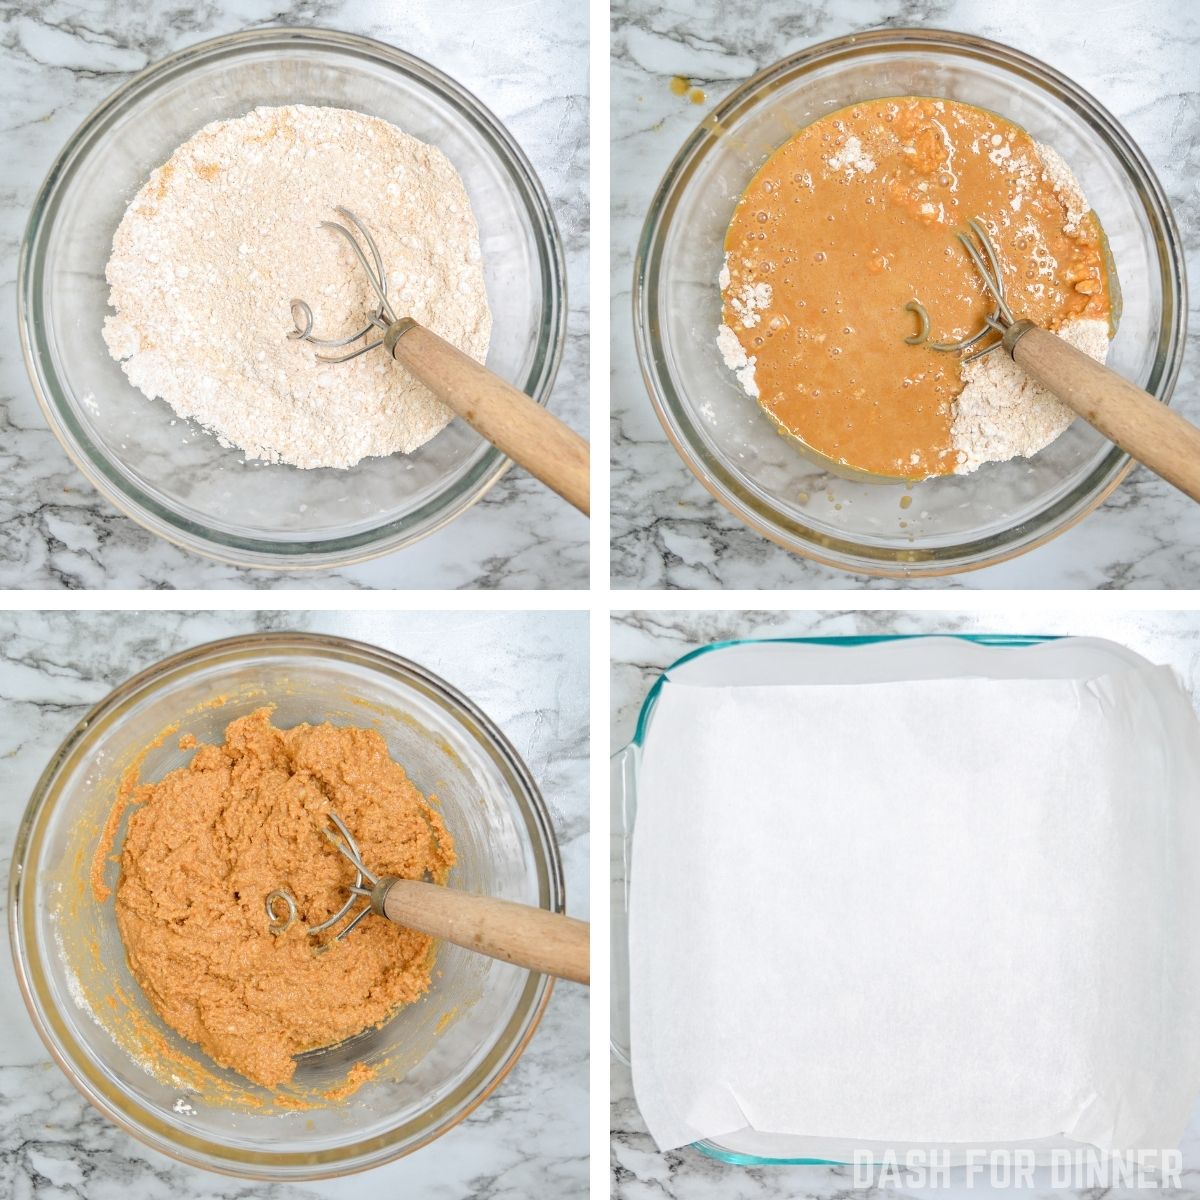 How to make no bake peanut butter bars: making the peanut butter base.